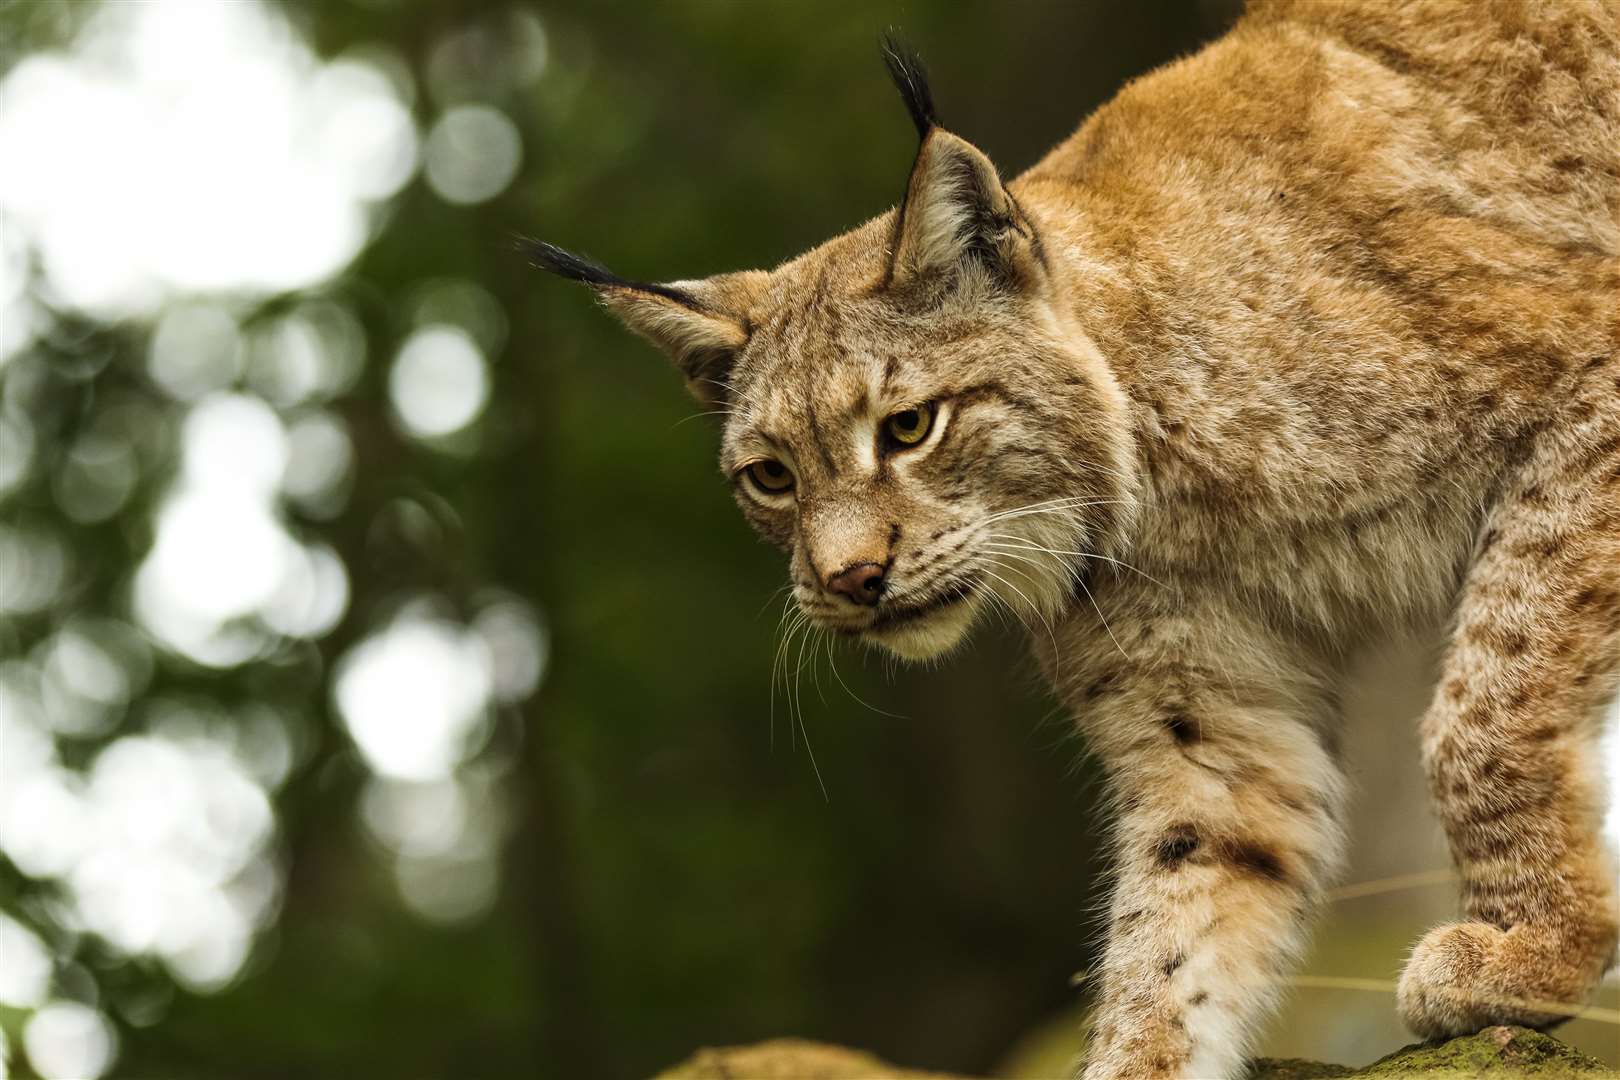 WATCH: First potential release site for reintroduction of lynx to Scotland  is announced